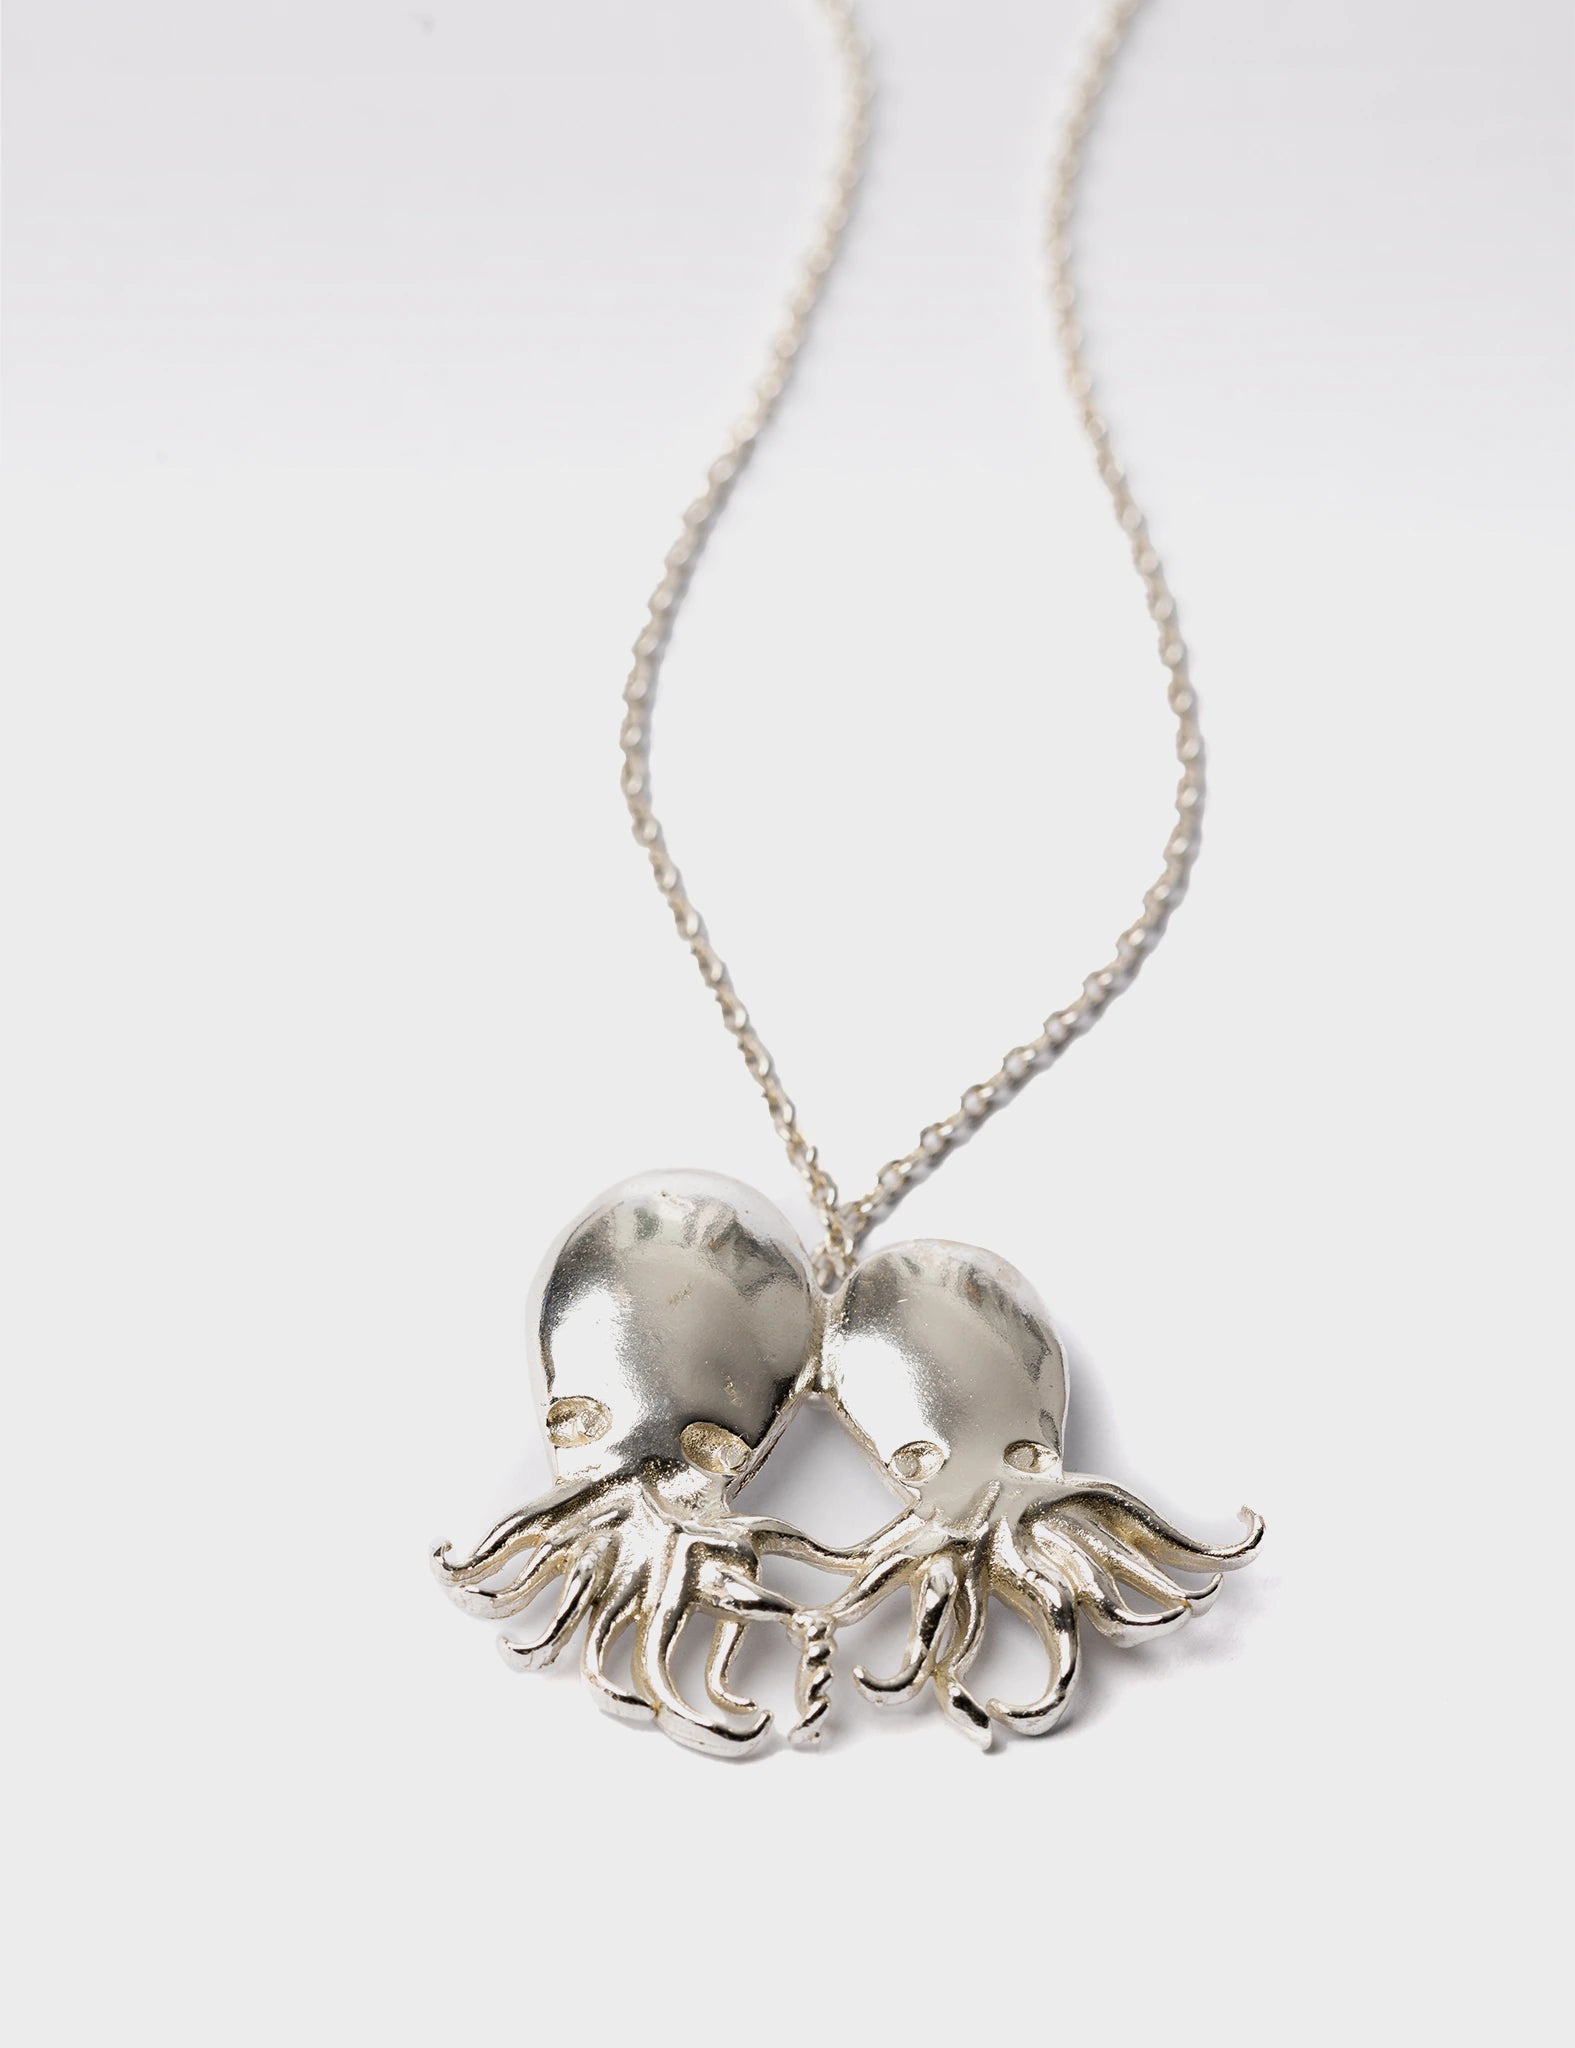 Silver Twin Flame Necklace - Octopus Pendant